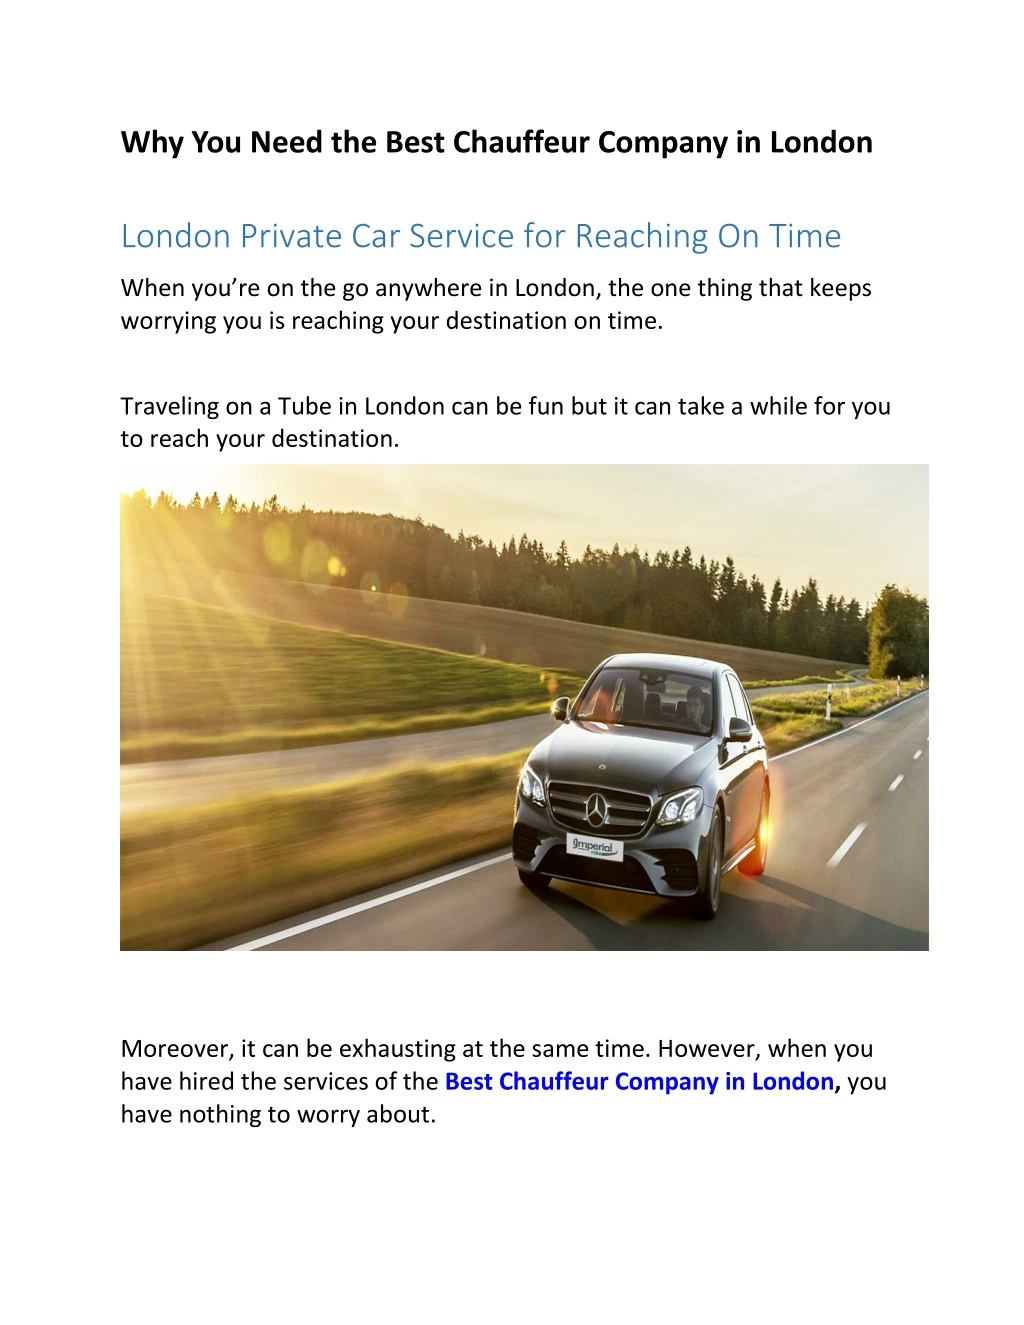 why you need the best chauffeur company in london